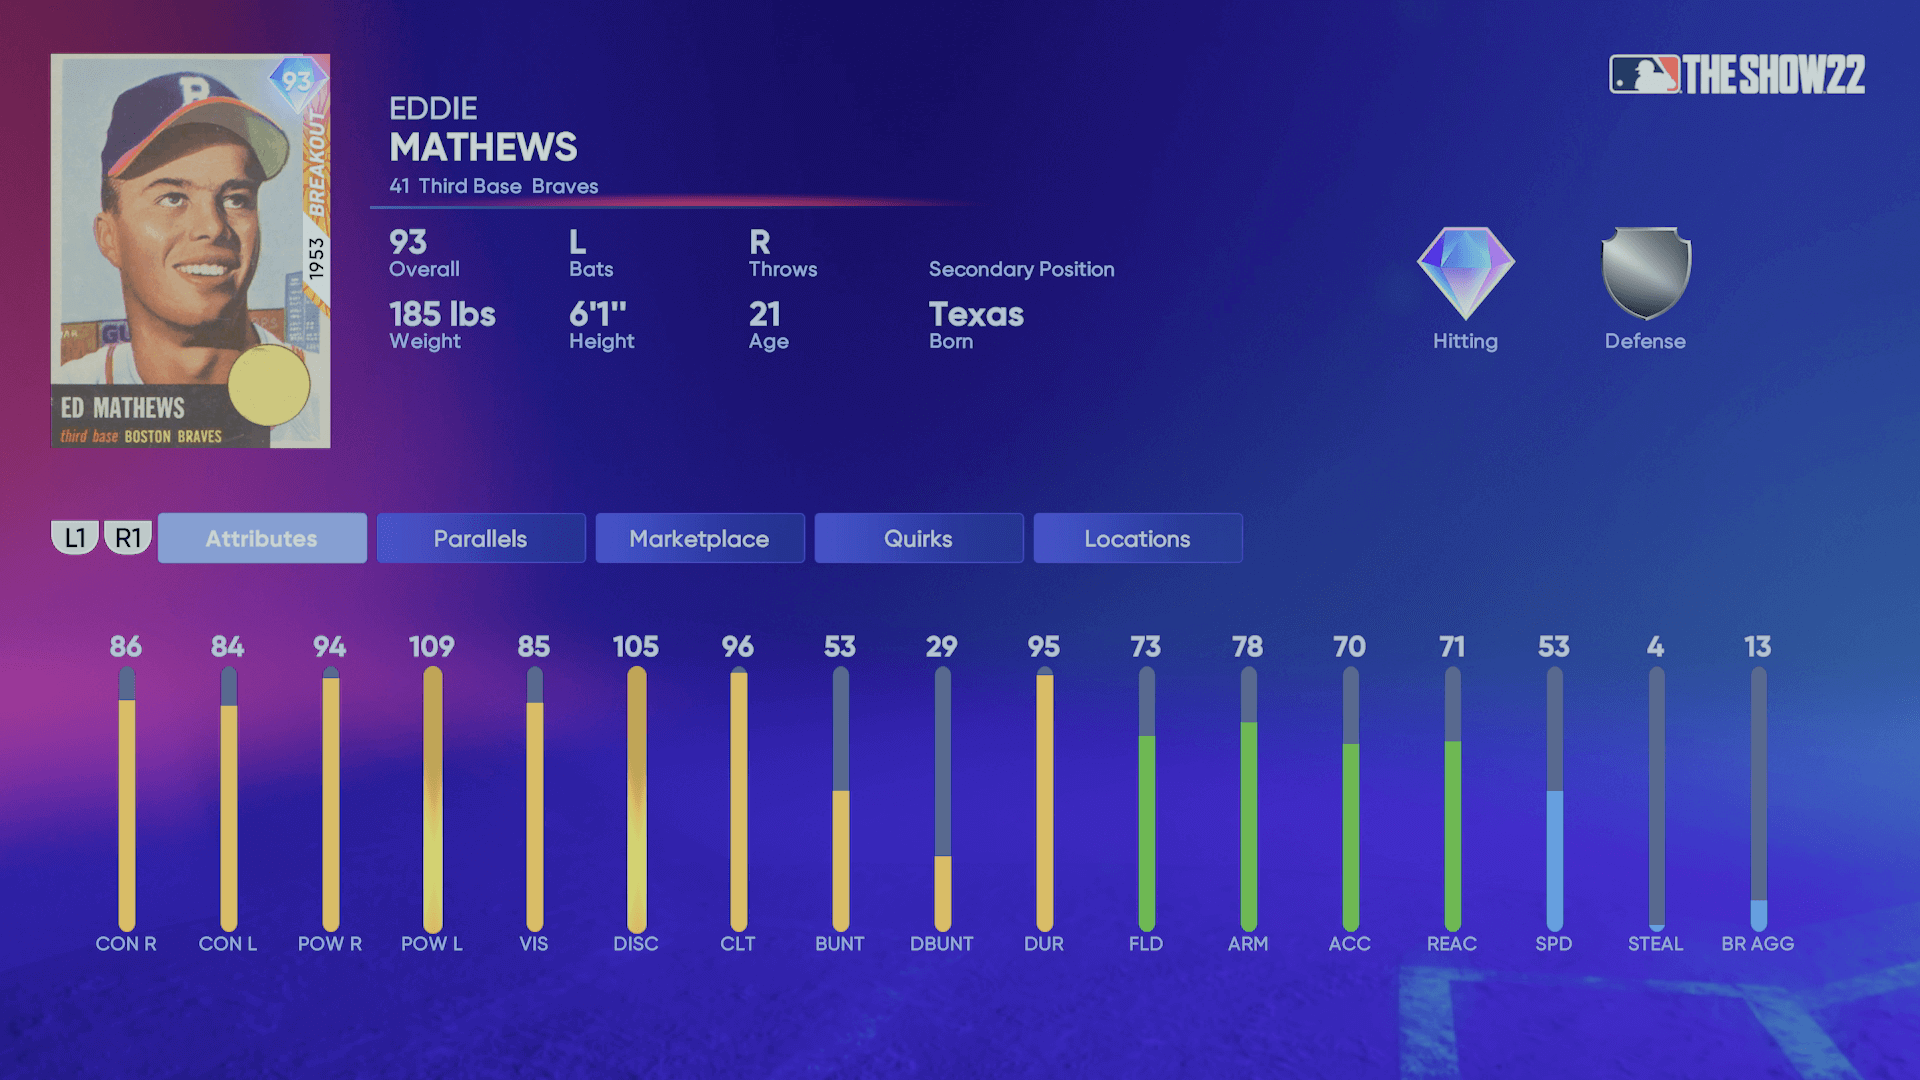 I TRIED OUT *93* EDDIE MATTHEWS FOR THE FIRST TIME MLB The Show 22  Diamond Dynasty 